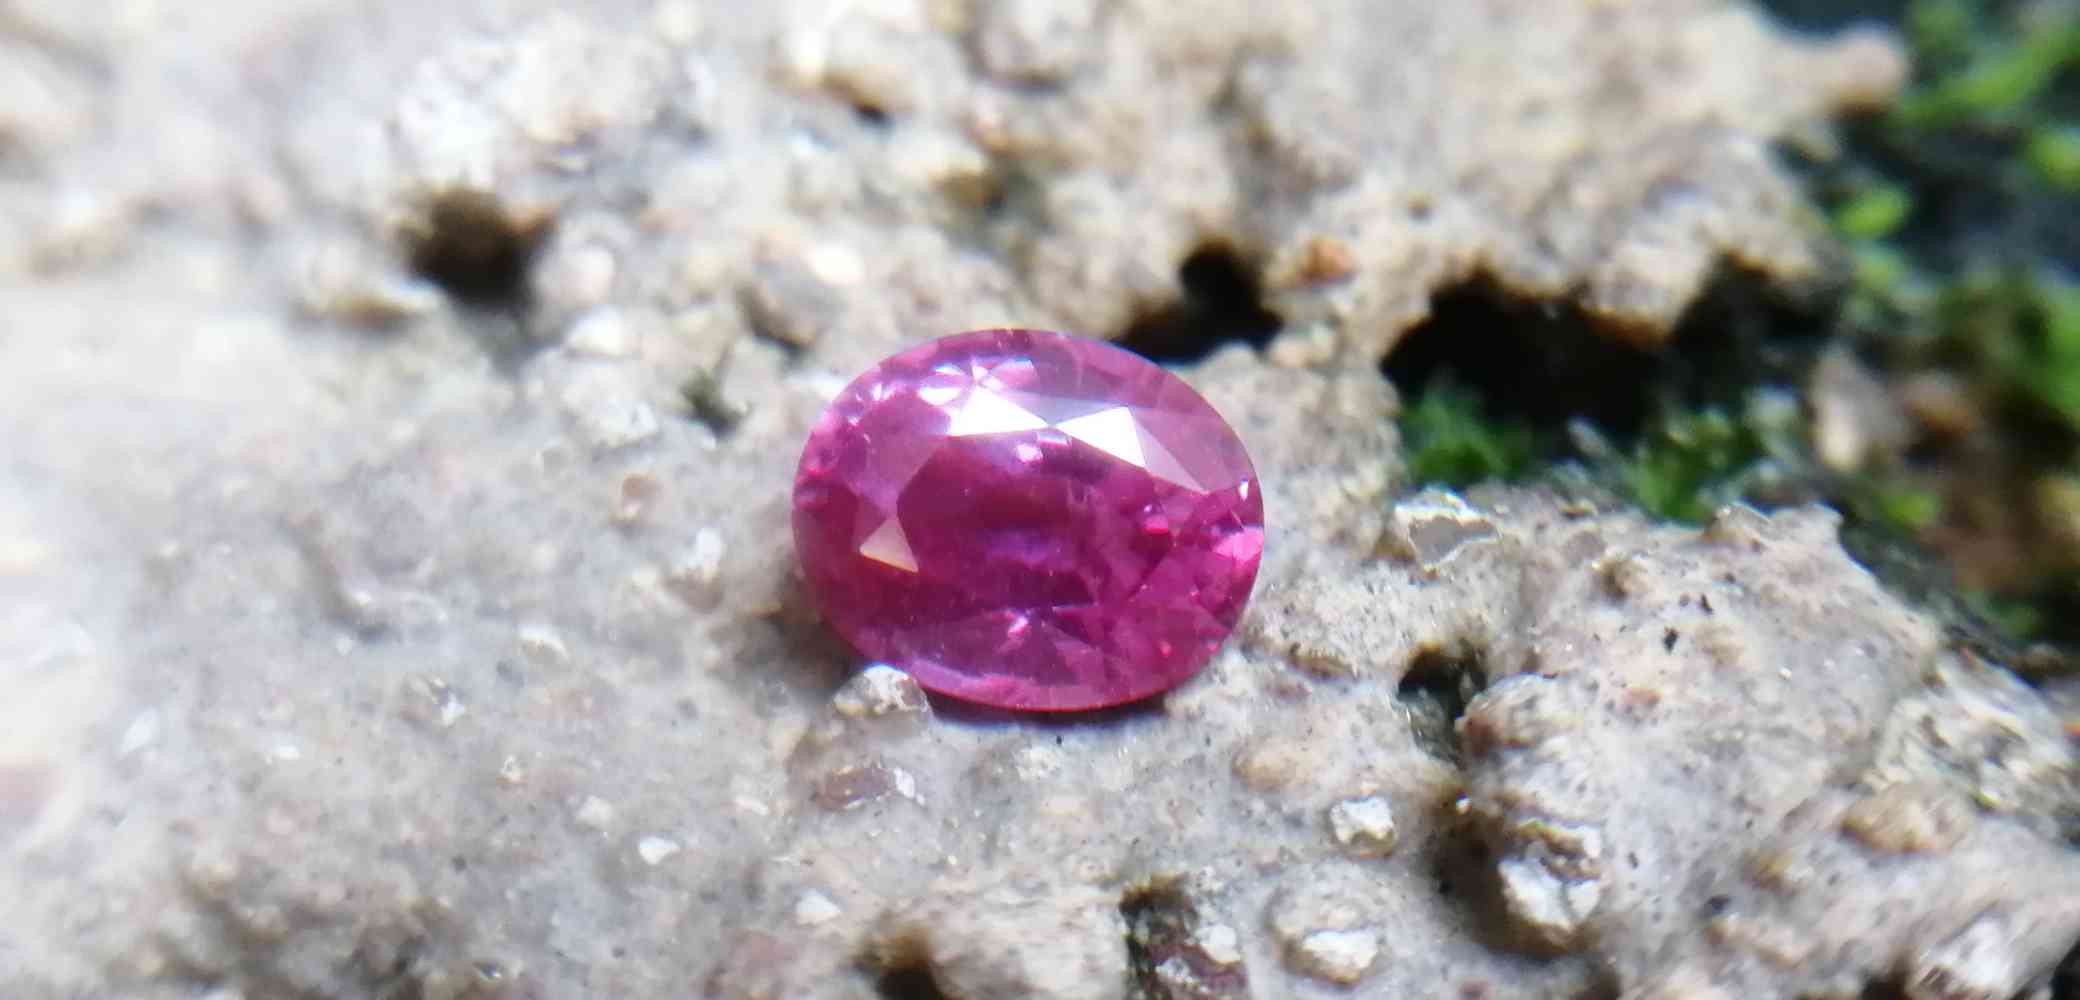 Ceylon Natural Pink Sapphire  Colour : Pink Shape : Oval Weight : 0.86 Cts Dimension : 6.1 x 4.9 x 3.3 mm Treatment : Unheated Clarity : VS   Sapphire is a precious gemstone, a variety of the mineral corundum, consisting of aluminum oxide with trace amounts of elements such as iron, titanium, chromium, copper, or magnesium. Sapphire deposits are found in Eastern Australia, Thailand, Sri Lanka, China, Vietnam, Madagascar, Greenland, East Africa, and in North America in mostly in Montana. Madagascar, Sri Lanka, and Kashmir produce large quantities of fine quality Sapphires for the world market. Sapphires are mined from alluvial deposits or from primary underground workings. Blue Sapphire and Ruby are the most popular Gemstone in Corundum Family. also, Orangy Pink Sapphire is called Padparadscha. The name Drive's from the Sinhalese word "padmaraga" " පද්මරාග", meaning lotus blossom, as the stone is of a similar color to the lotus blossom. Bi-Color Sapphire from DanuGroup Collection Also, Sapphire can be found as parti-color, bi-color or fancy color. Australia is a main parti-color Sapphire producer. White Sapphire also, White sapphire is a very popular stone to wear instead of Diamond as a 3rd hardness gemstone after diamond ( moissanite hardness is 9.5). Various colors of star sapphires A star sapphire is a type of sapphire that exhibits a star-like phenomenon known as asterism. Also, A rare variety of natural sapphire, known as color-change sapphire, exhibits different colors in a different light. Sapphires can be treated by several methods to enhance and improve their clarity and color. A common method is done by heating the sapphires in furnaces to temperatures between 500 and 1,850 °C for several hours, or by heating in a nitrogen-deficient atmosphere oven for 1 week or more. Geuda is a form of the mineral corundum. Geuda is found primarily in Sri Lanka. It's a semitransparent and milky appearance due to rutile inclusions. Geuda is used to improve its color by heat treatment. Some geuda varieties turn to a blue color after heat treatments and some turn to red after oxidizing. Also, Kowangu pushparaga turns to yellow sapphire after oxidizing. Sapphire Crystal system is a Trigonal crystal system with a hexagonal scalenohedral crystal class. Sapphire hardness is 9 according to the Mohs hardness scale with 4.0~4.1 specific gravity. Refractive index ω          =1.768–1.772 nε =1.760–1.763 Solubility = Insoluble Melting point = 2,030–2,050 °C Birefringence  = 0.008 Pleochroism = Strong Luster = Vitreous Sapphire is the birthstone for September and the gem of the 45th anniversary. Healing Properties of Sapphire Sapphire releases mental tension, depression, unwanted thoughts, and spiritual confusion.  Sapphire is known as a "stone of Wisdom". It is exceptional for calming and focusing the mind, allowing the release of mental tension and unwanted thoughts. Sapphire is also the best stone for awakening chakras. Dark Blue or Indigo Sapphire stimulates the Third Eye chakra. Blue Sapphire stimulates the Throat Chakra. Green sapphire stimulates Heart Chakra. Black Sapphire stimulates Base Chakra. White sapphire stimulates Crown Chakra. Yellow sapphire stimulates Solar Plexus Chakra.  Pink Sapphire Healings Pink Sapphire reflects the Light of the heart and love and stimulates the Heart Chakra, located near the center of the breastbone. It is believed that pink sapphires used for therapeutic purposes as crystals might nourish the emotional well-being of the person wearing the jewelry crafted from the gems. The theory behind these therapeutic beliefs centers on clearing emotional blockages from the past to release hurtful experiences. Pink Sapphire helps strengthen and balance the heart. It is also useful in balancing blood sugar, glucose metabolism and in cases of diabetes, hypoglycemia, and hyperglycemia. • Nourishing the Emotional Body with the PinkColor Ray • Energetic Columns of Support • Longevity and Extending the Lifespan of Your Cells • Astral Vision and Sensitivity to Energy